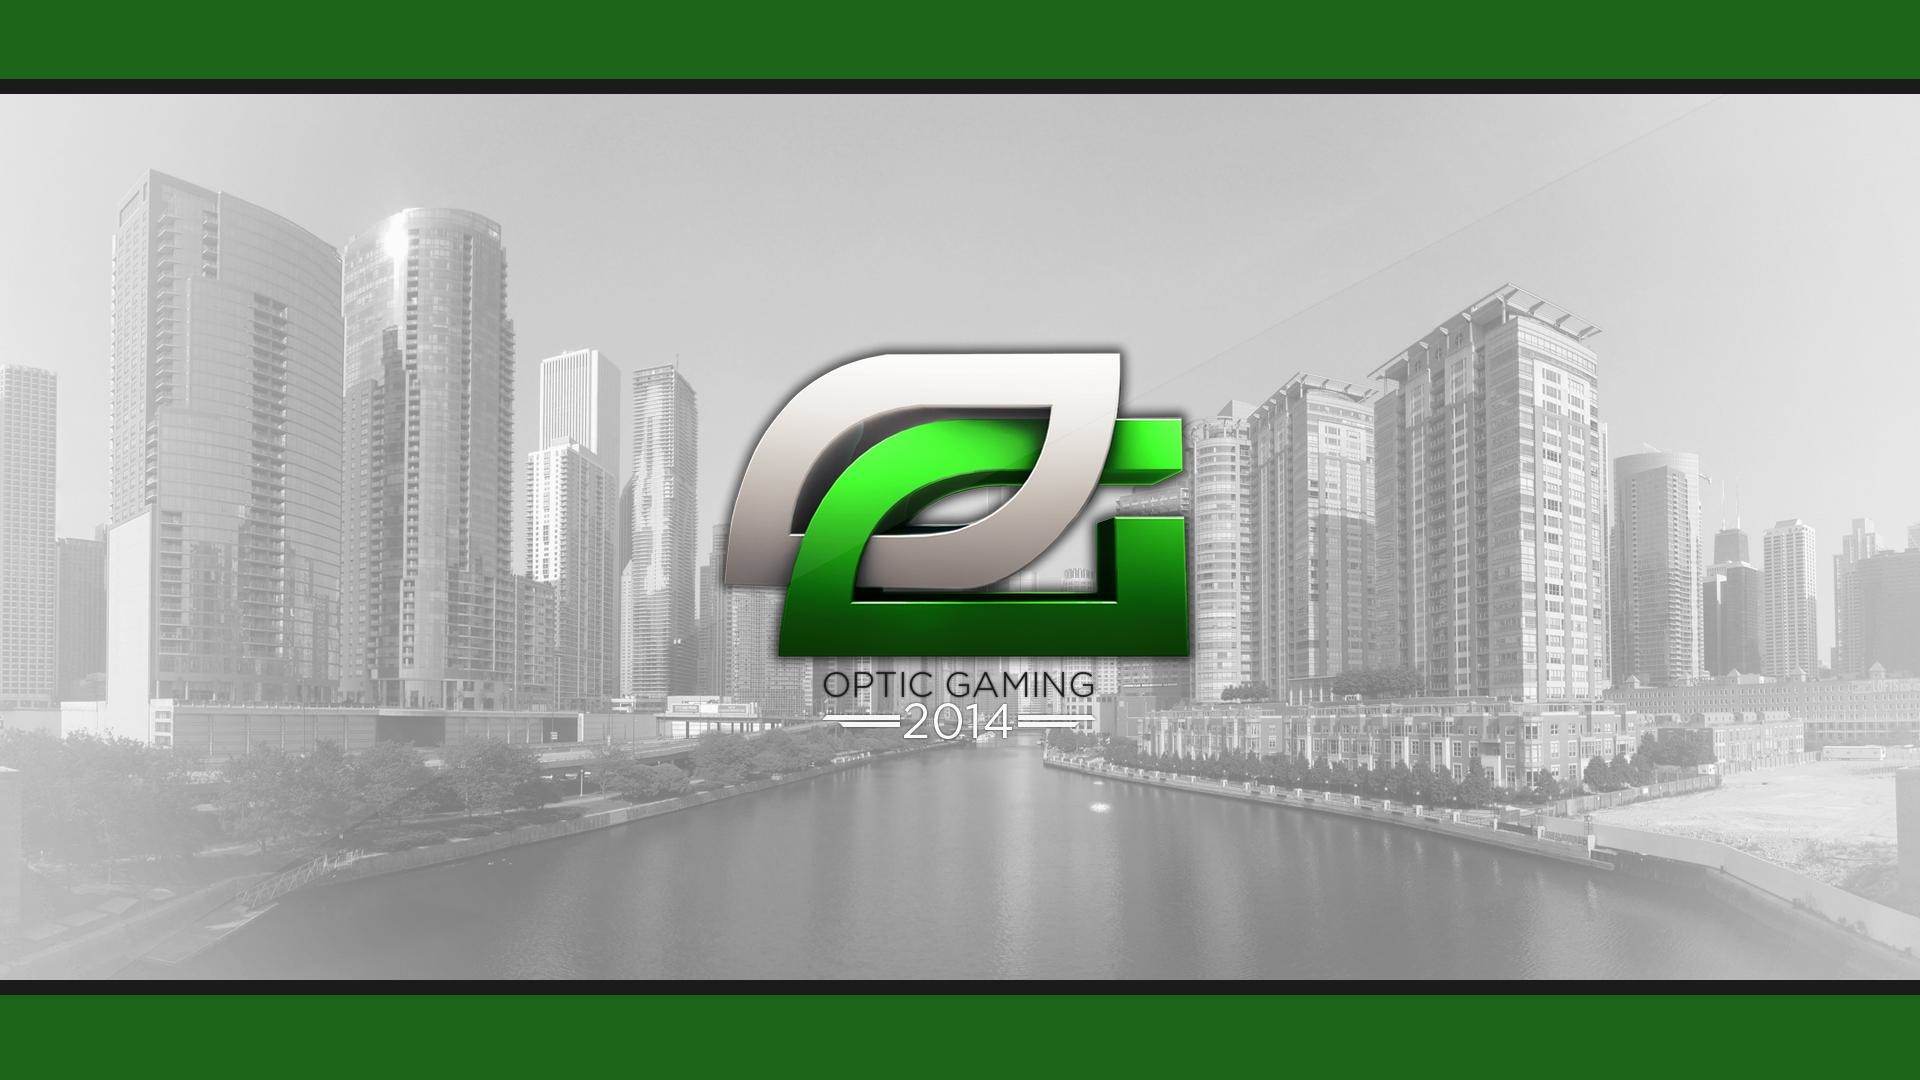 1920x1080 Optic Gaming Backgrounds | Wallpapers, Backgrounds, Images, Art ..